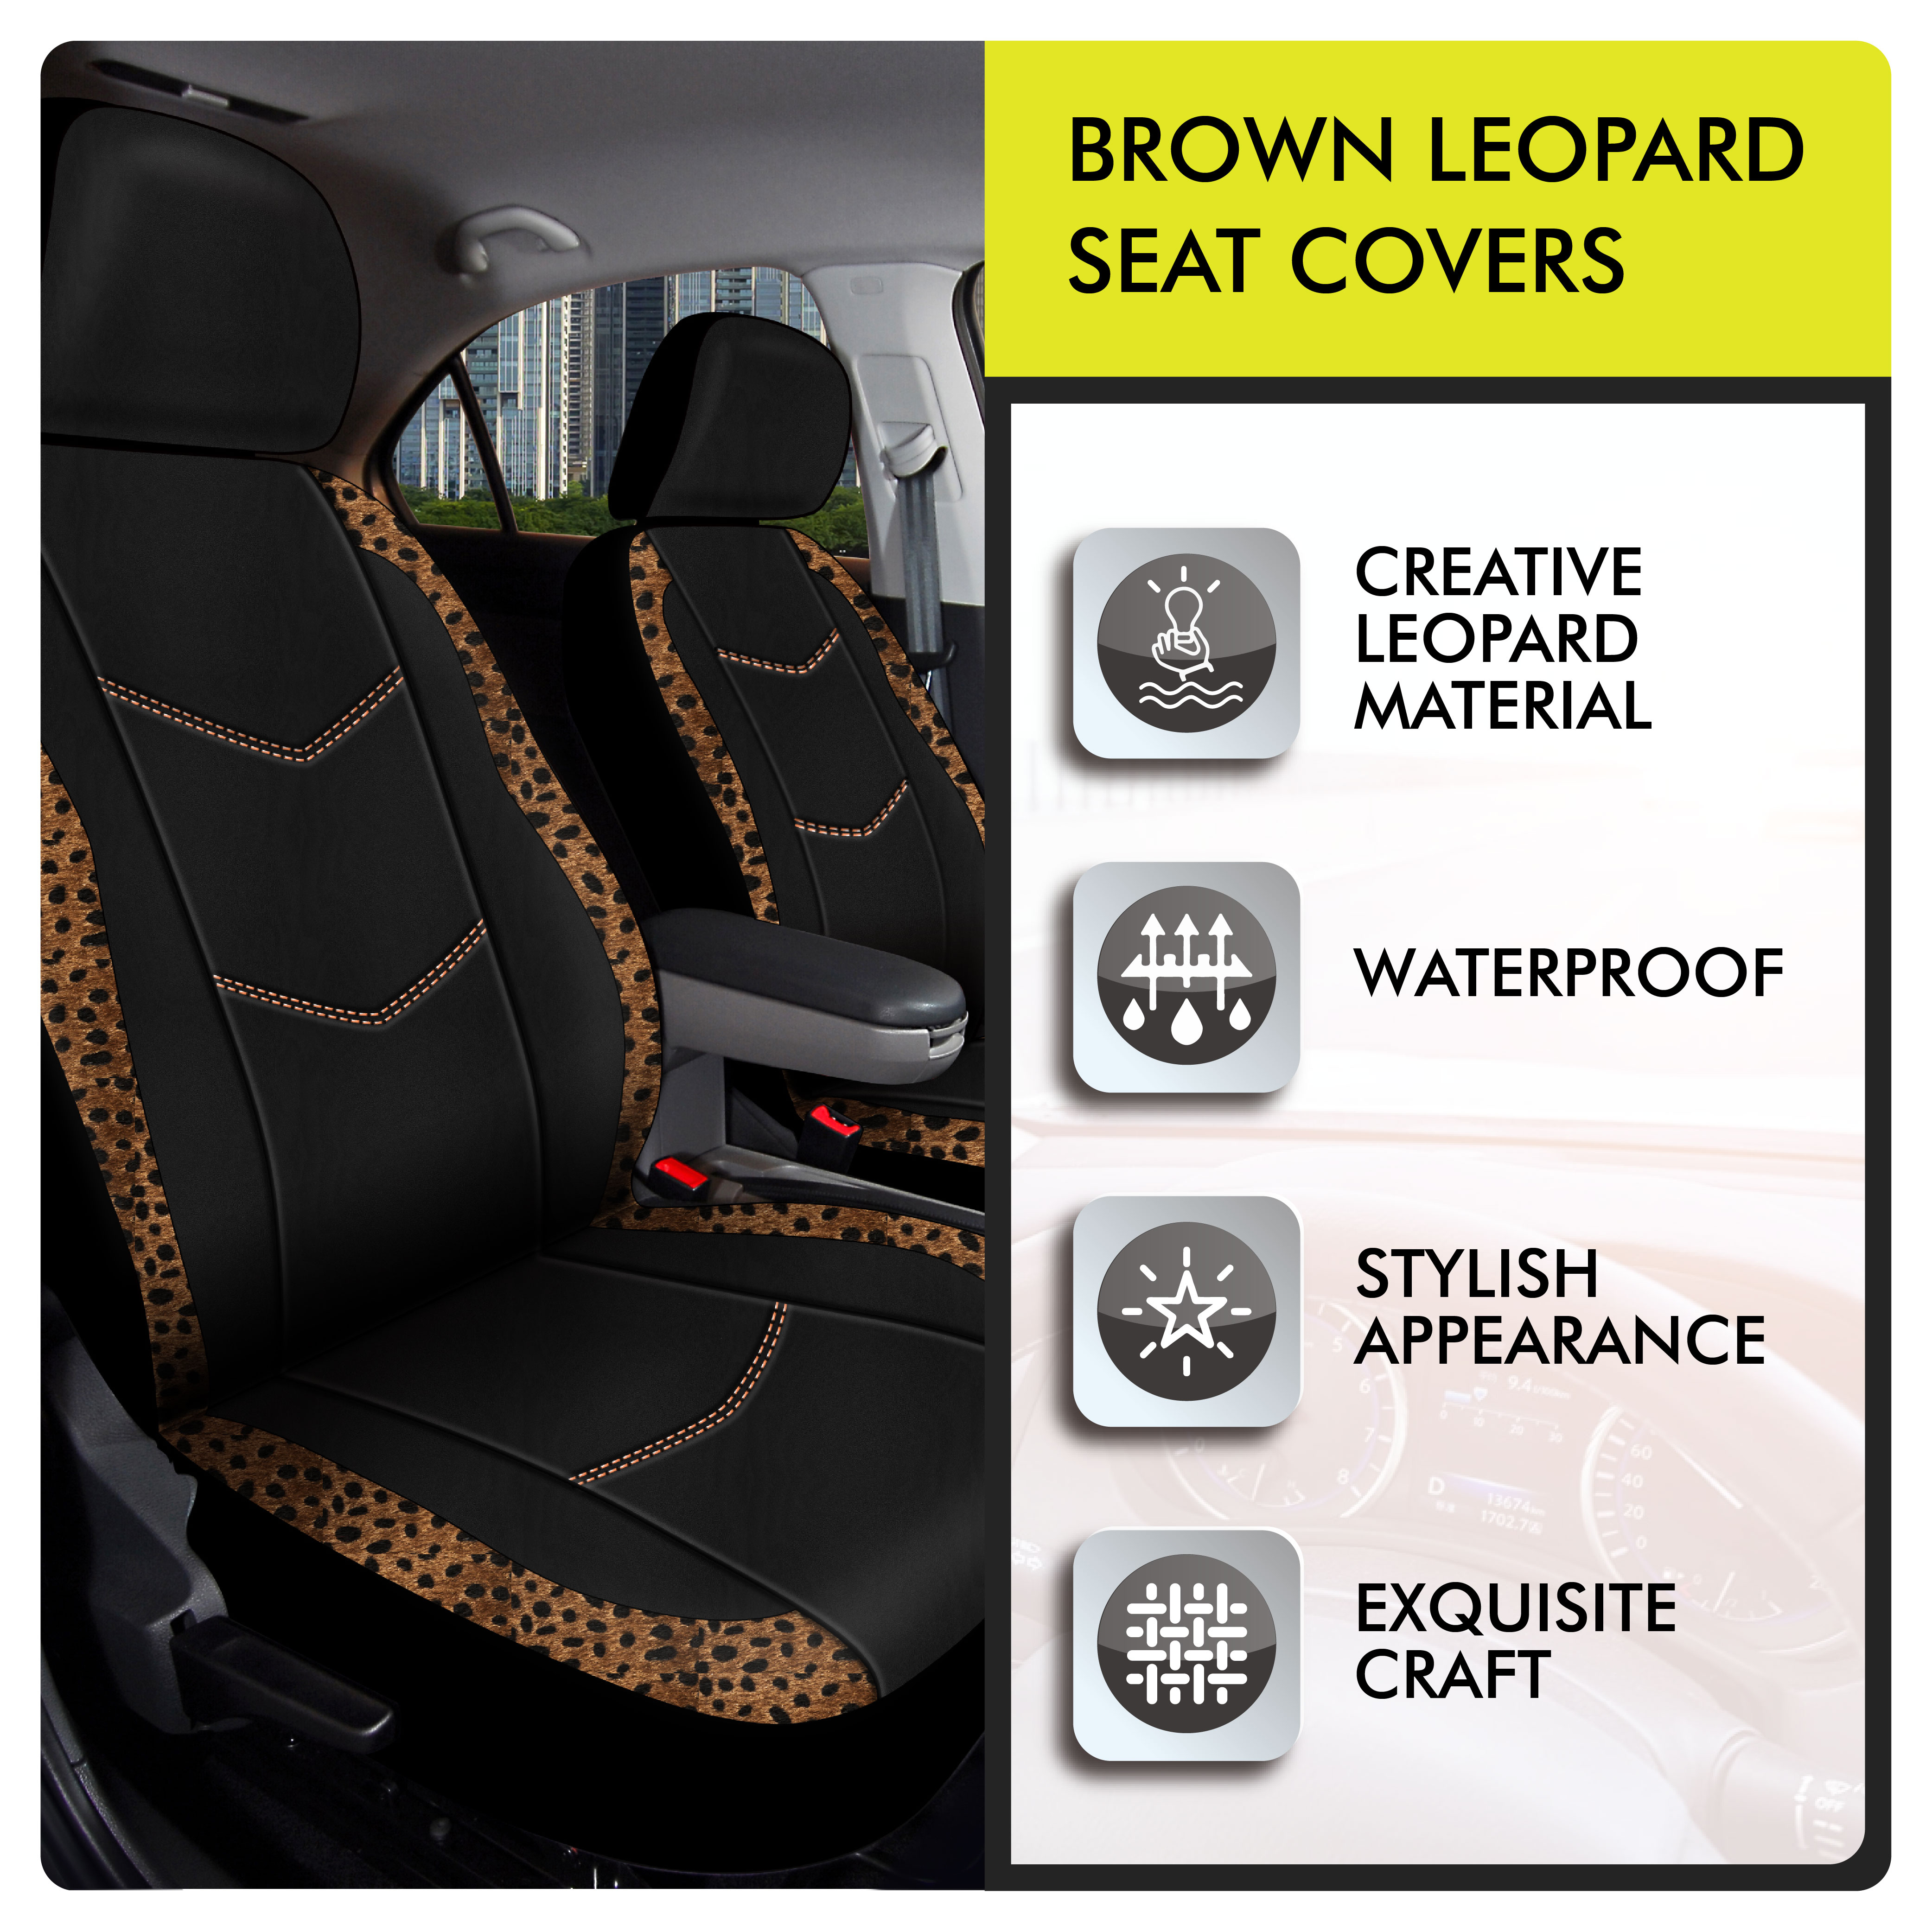 Auto Drive Brown Leopard Faux Leather Car Seat Covers, Set of 2, YT014 - image 3 of 7